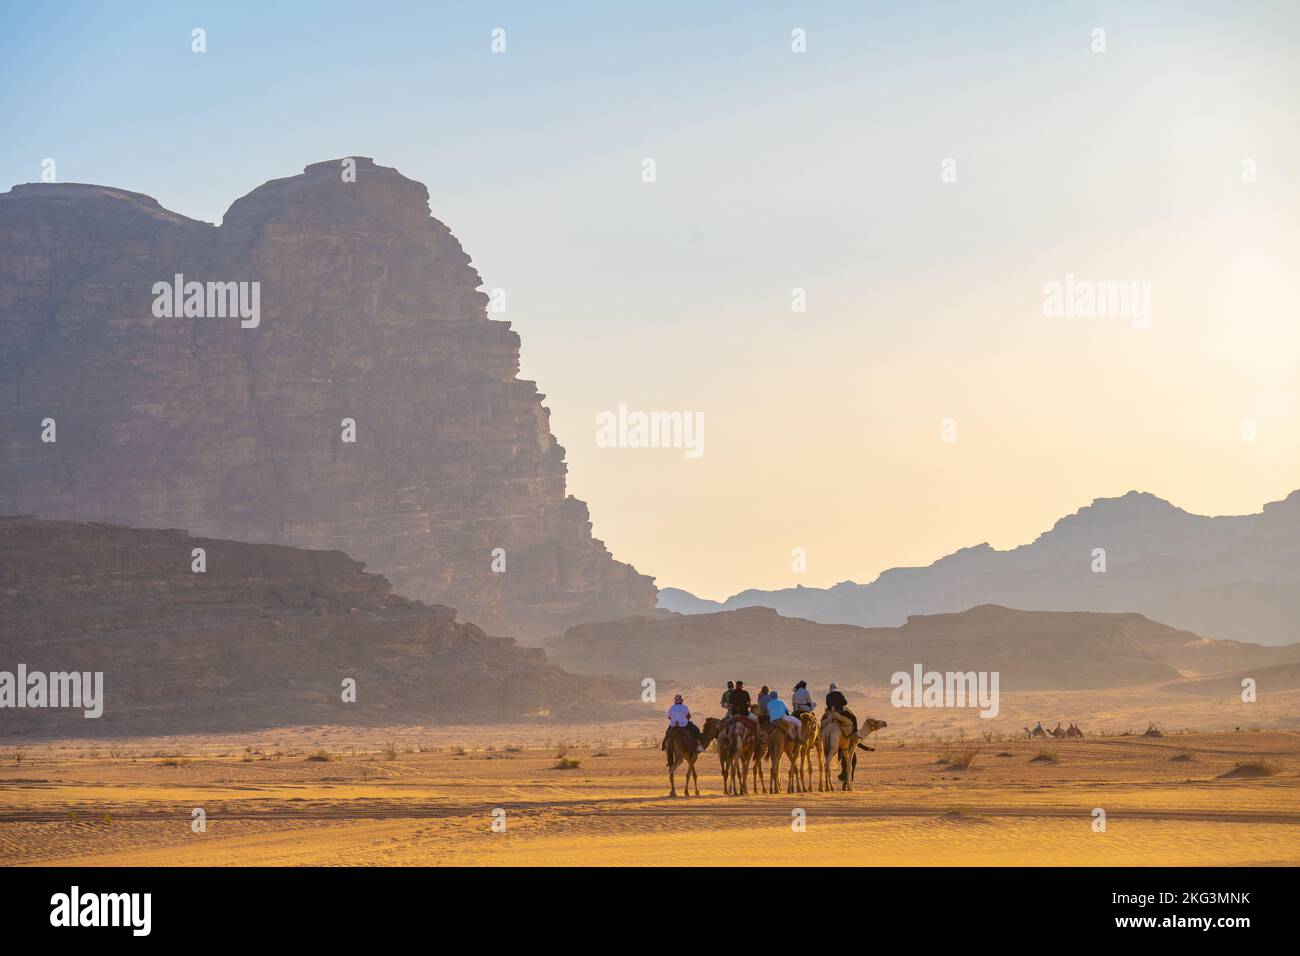 Tourists on an evening camel track on the sands of Wadi rum Jordan Stock Photo